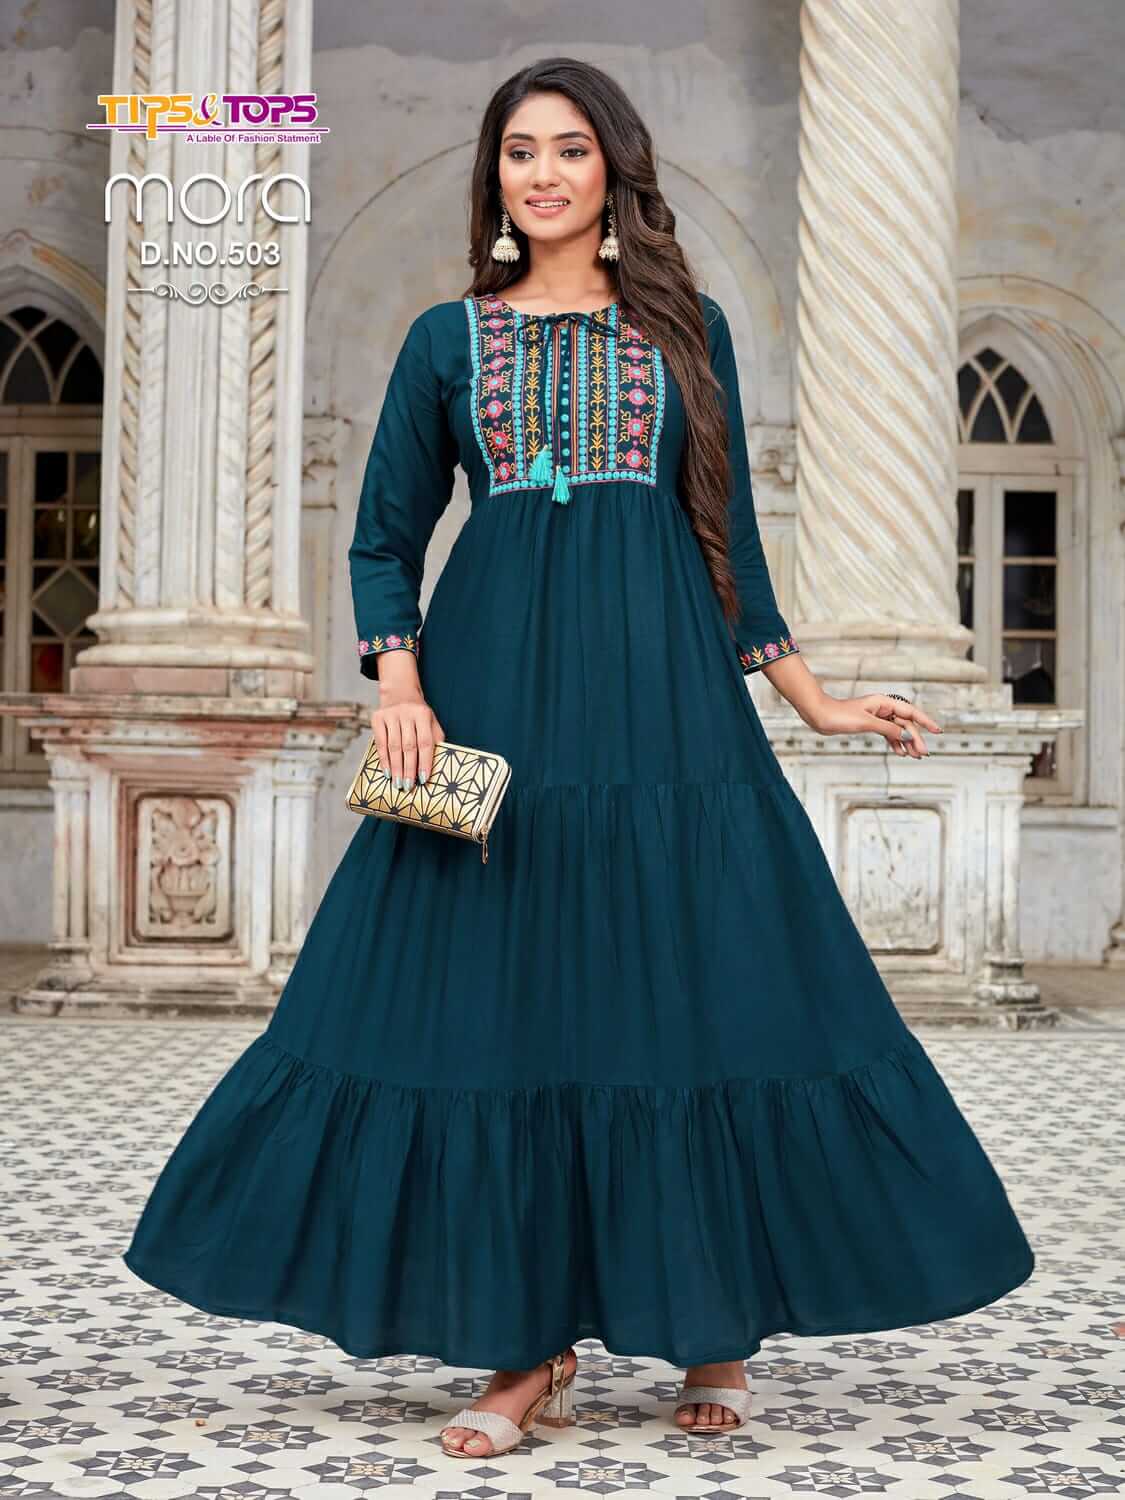 Tips and Tops Mora Vol 5 Gowns Catalog collection 2